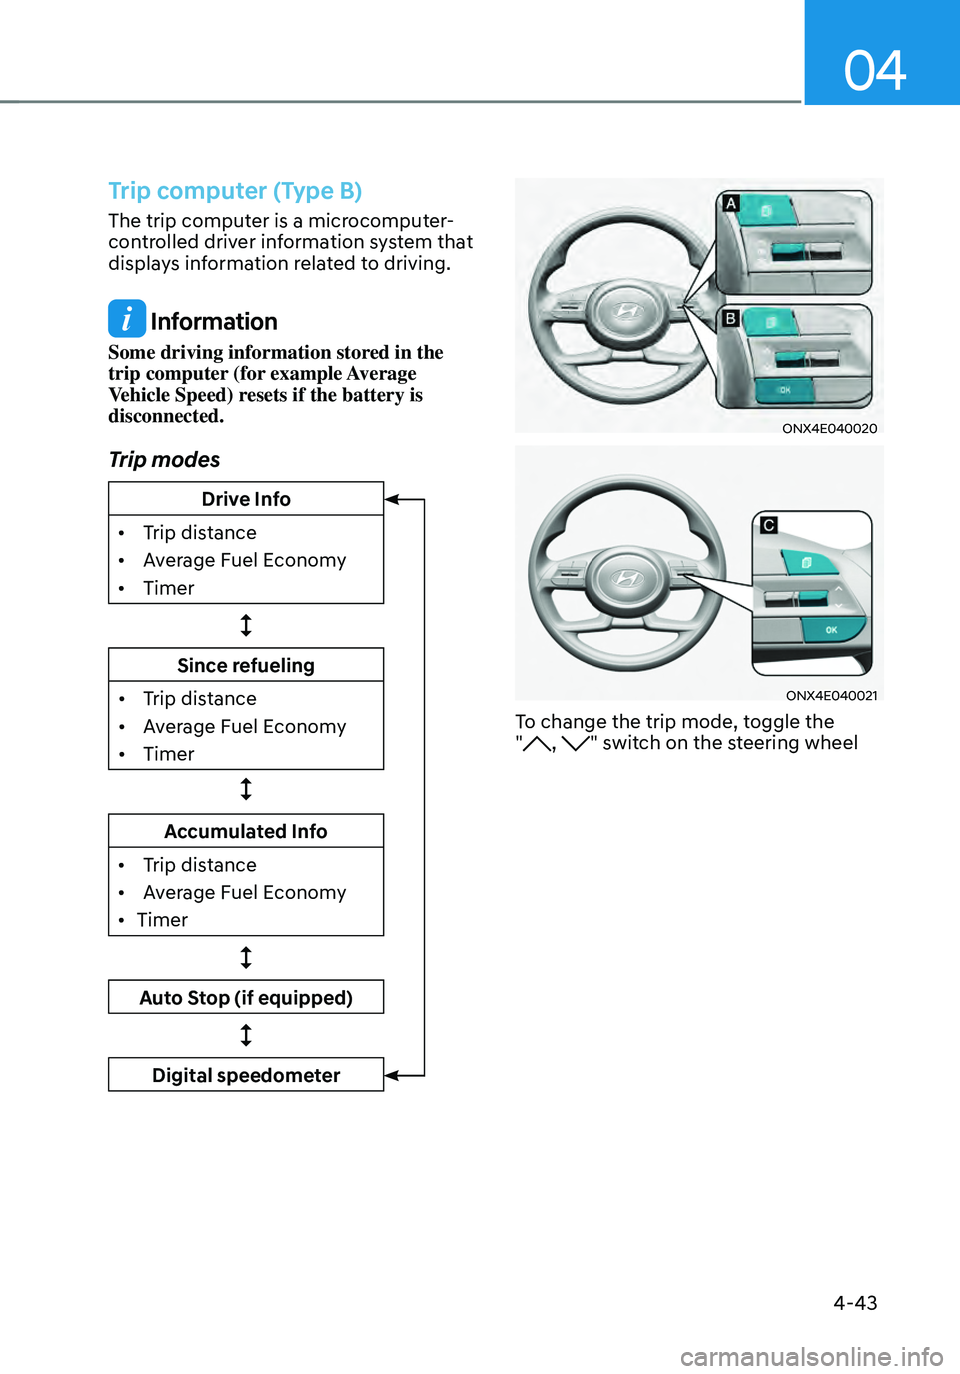 HYUNDAI TUCSON 2022  Owners Manual 04
4-43
Trip computer (Type B)
The trip computer is a microcomputer-
controlled driver information system that 
displays information related to driving.
 Information
Some driving information stored in